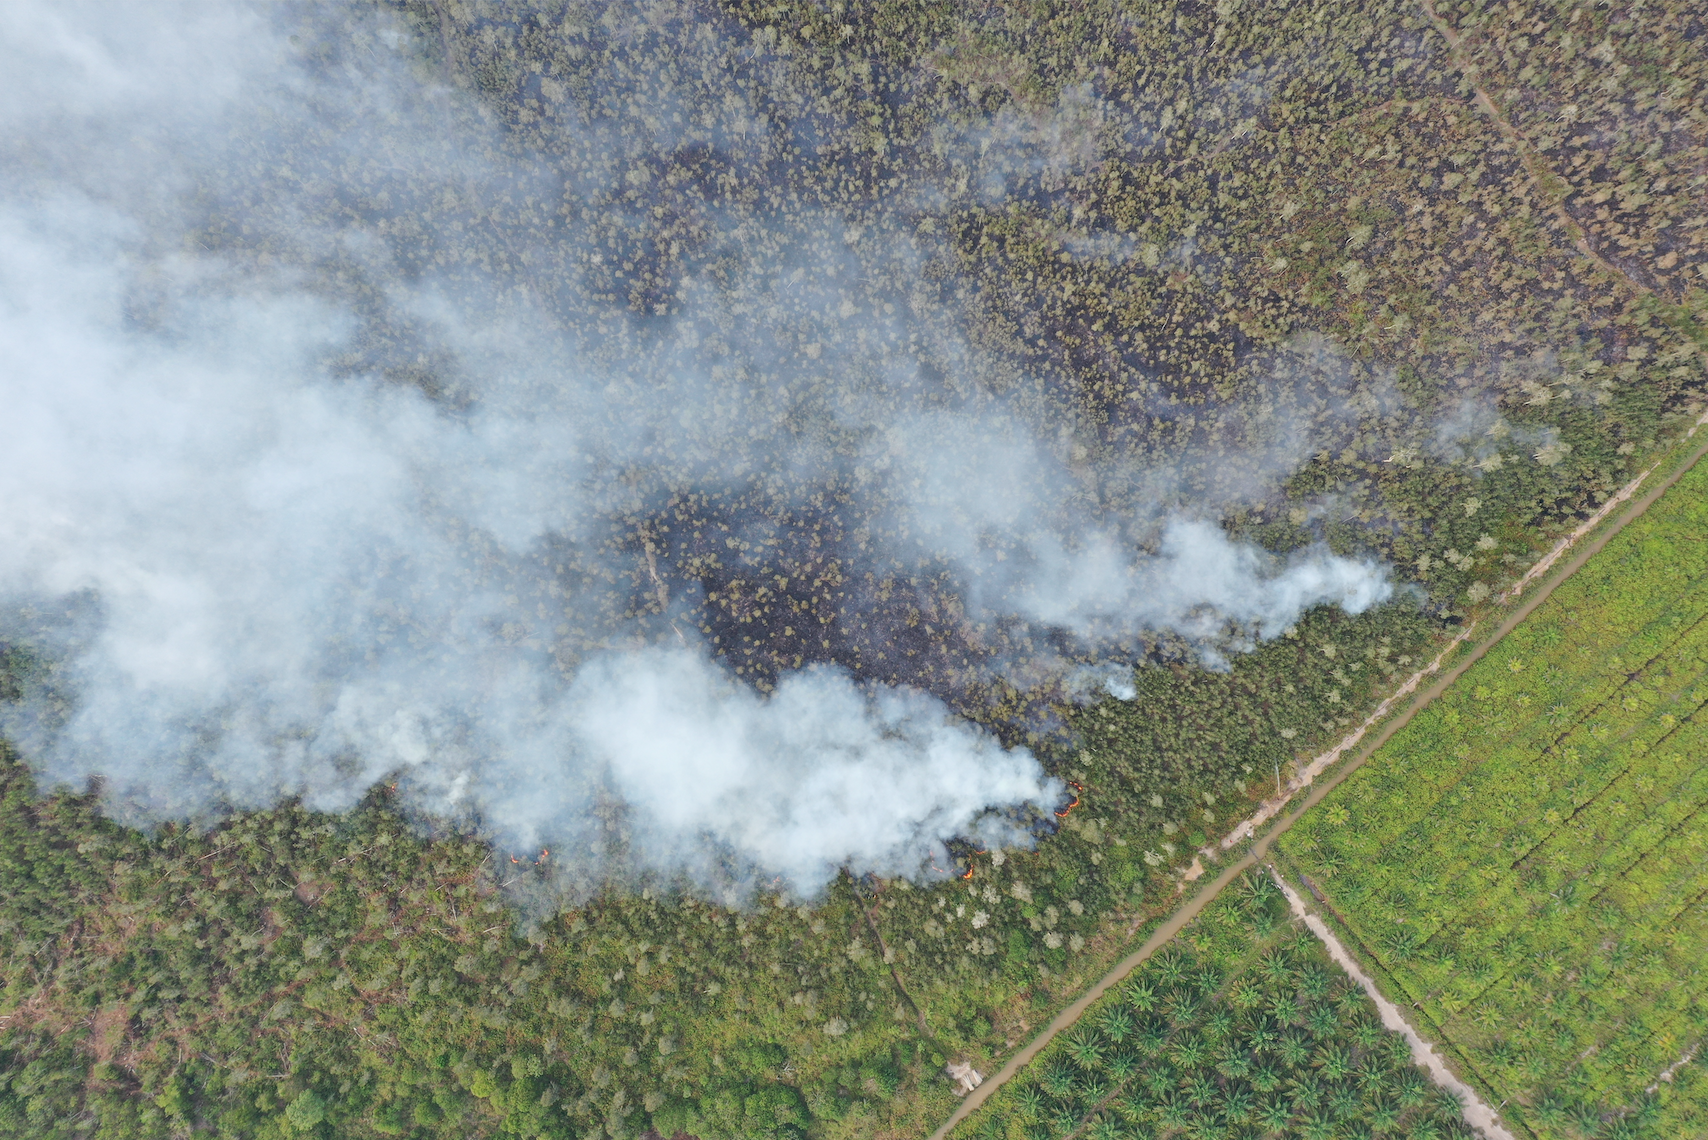 Forest and peat fires typically take place in Sumatra and Borneo, and are often linked to slash-and-burn practices to clear areas for palm cultivation and illegal logging. Image by daus85 / Shutterstock. Indonesia, undated.